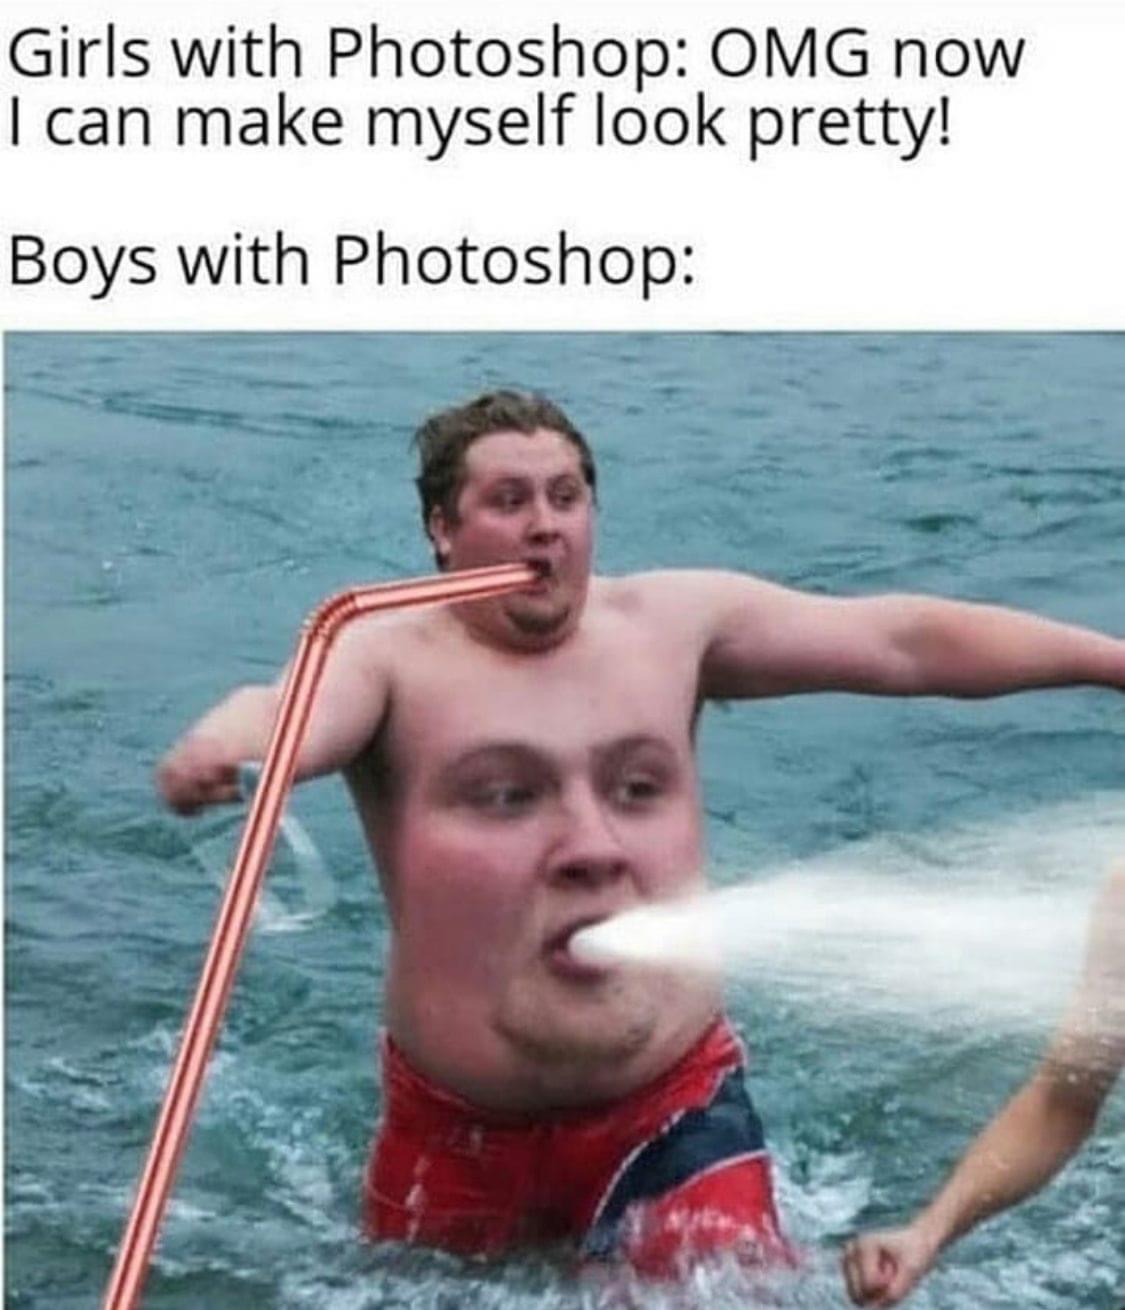 photoshop memes - Girls with Photoshop Omg now I can make myself look pretty! Boys with Photoshop